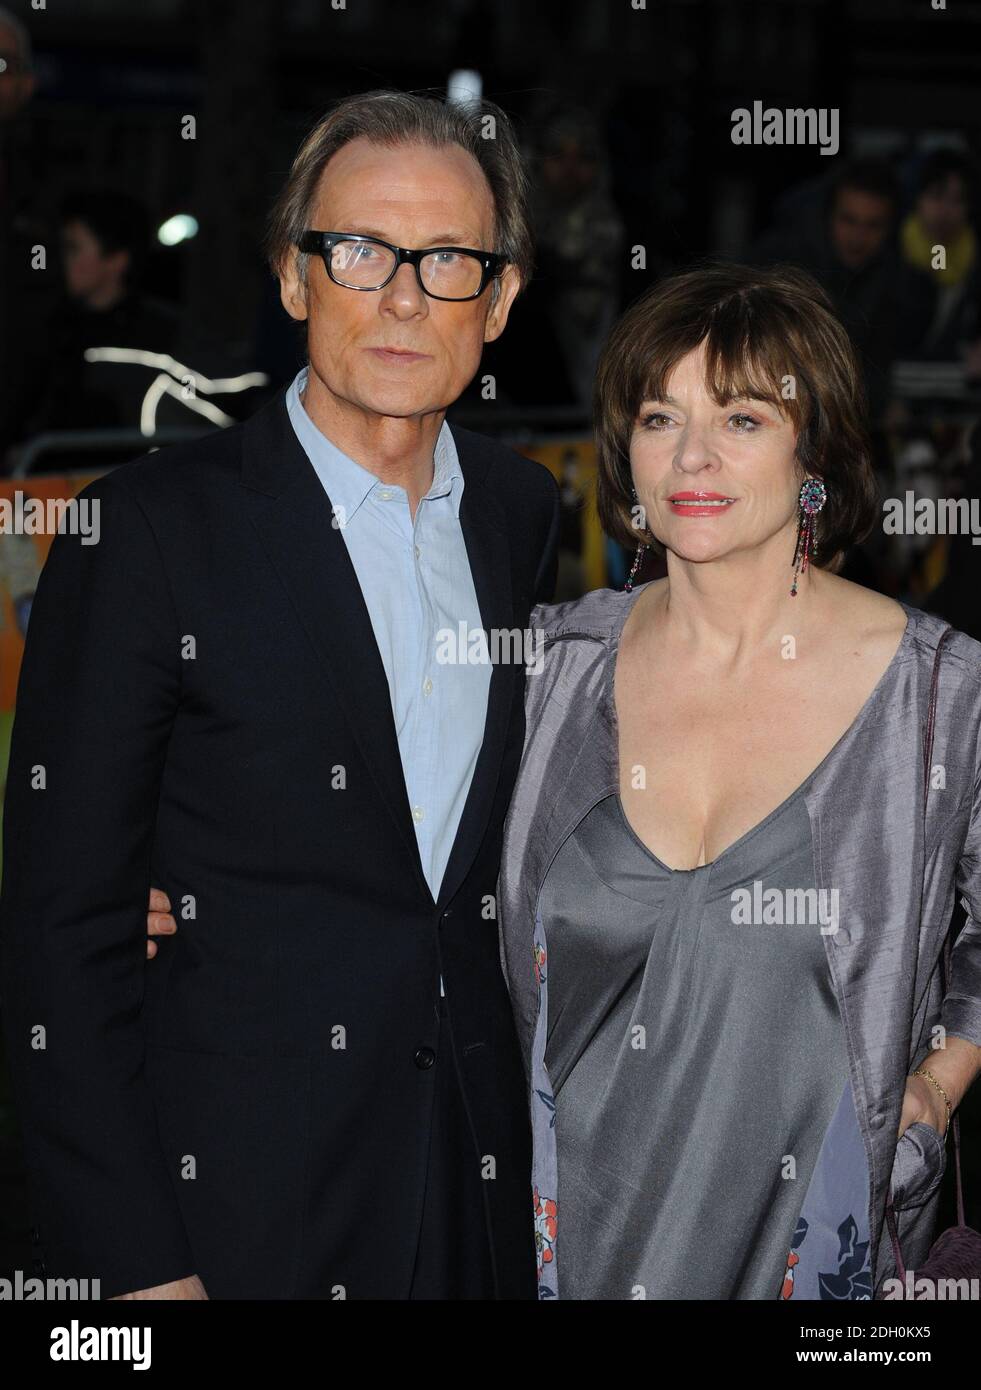 Bill Nighy and wife arriving for the premiere of The Boat That Rocked at the Odeon Leicester Square, London. Stock Photo